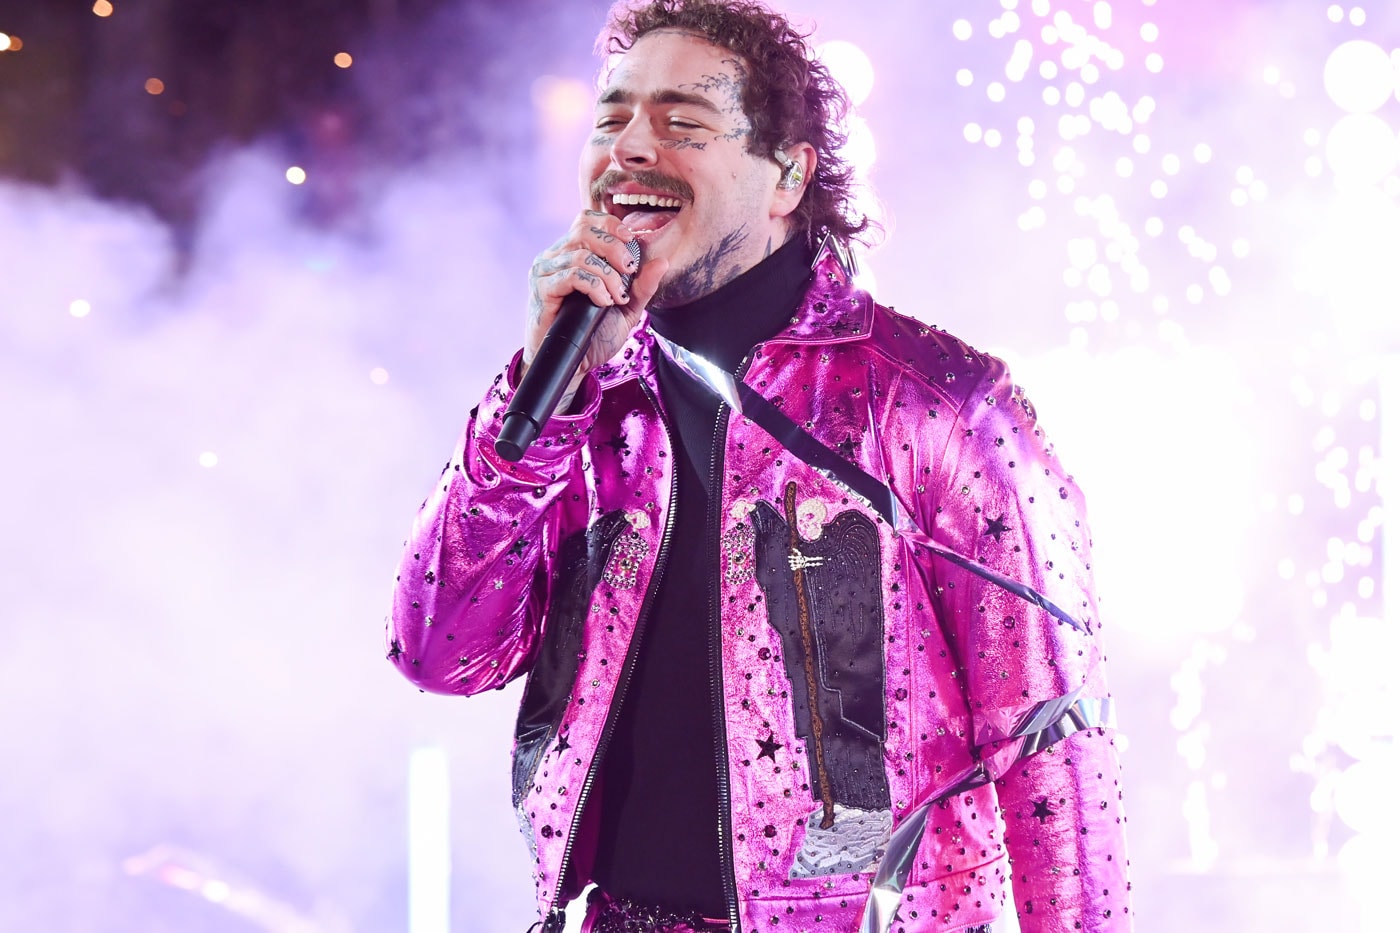 Post Malone Addresses His Controversial Comments New Video Twitter Rockstar